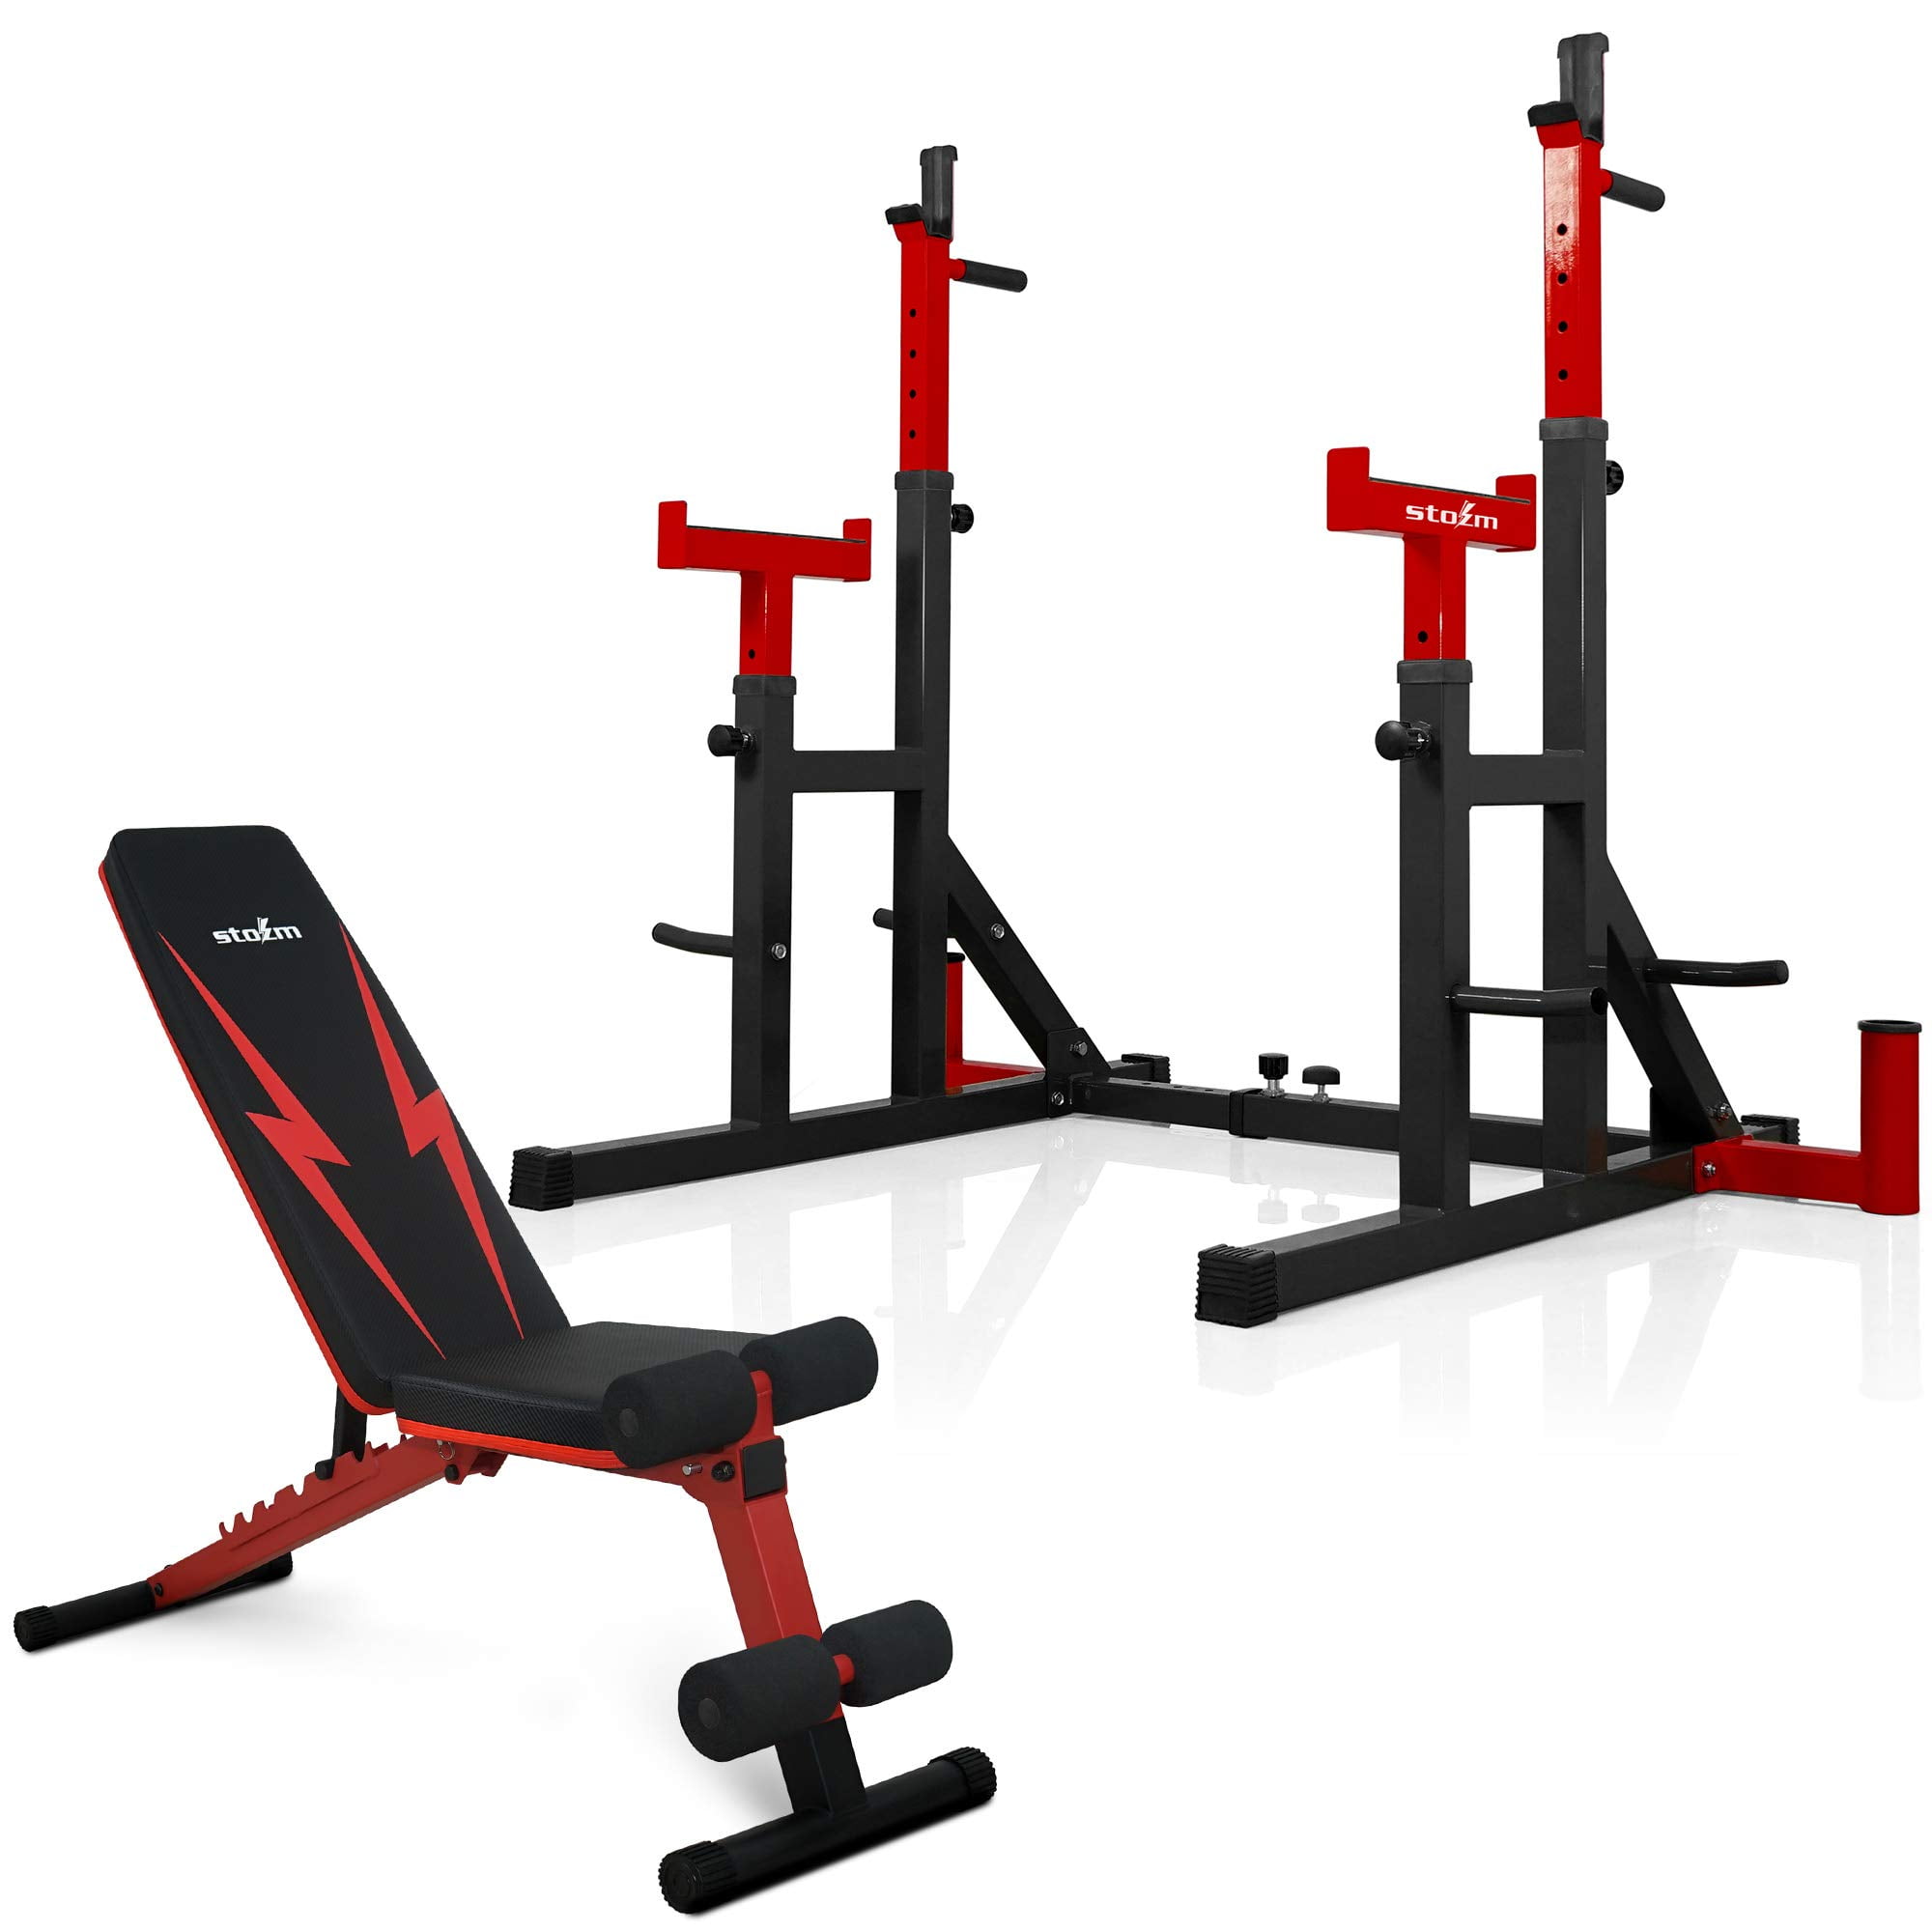 14-Gauge Steel Frame STOZM Combo Barbell Rack & Adjustable Weight Bench with Foldable Design for Weight Lifting & Full Body Workout Red/Crimson 